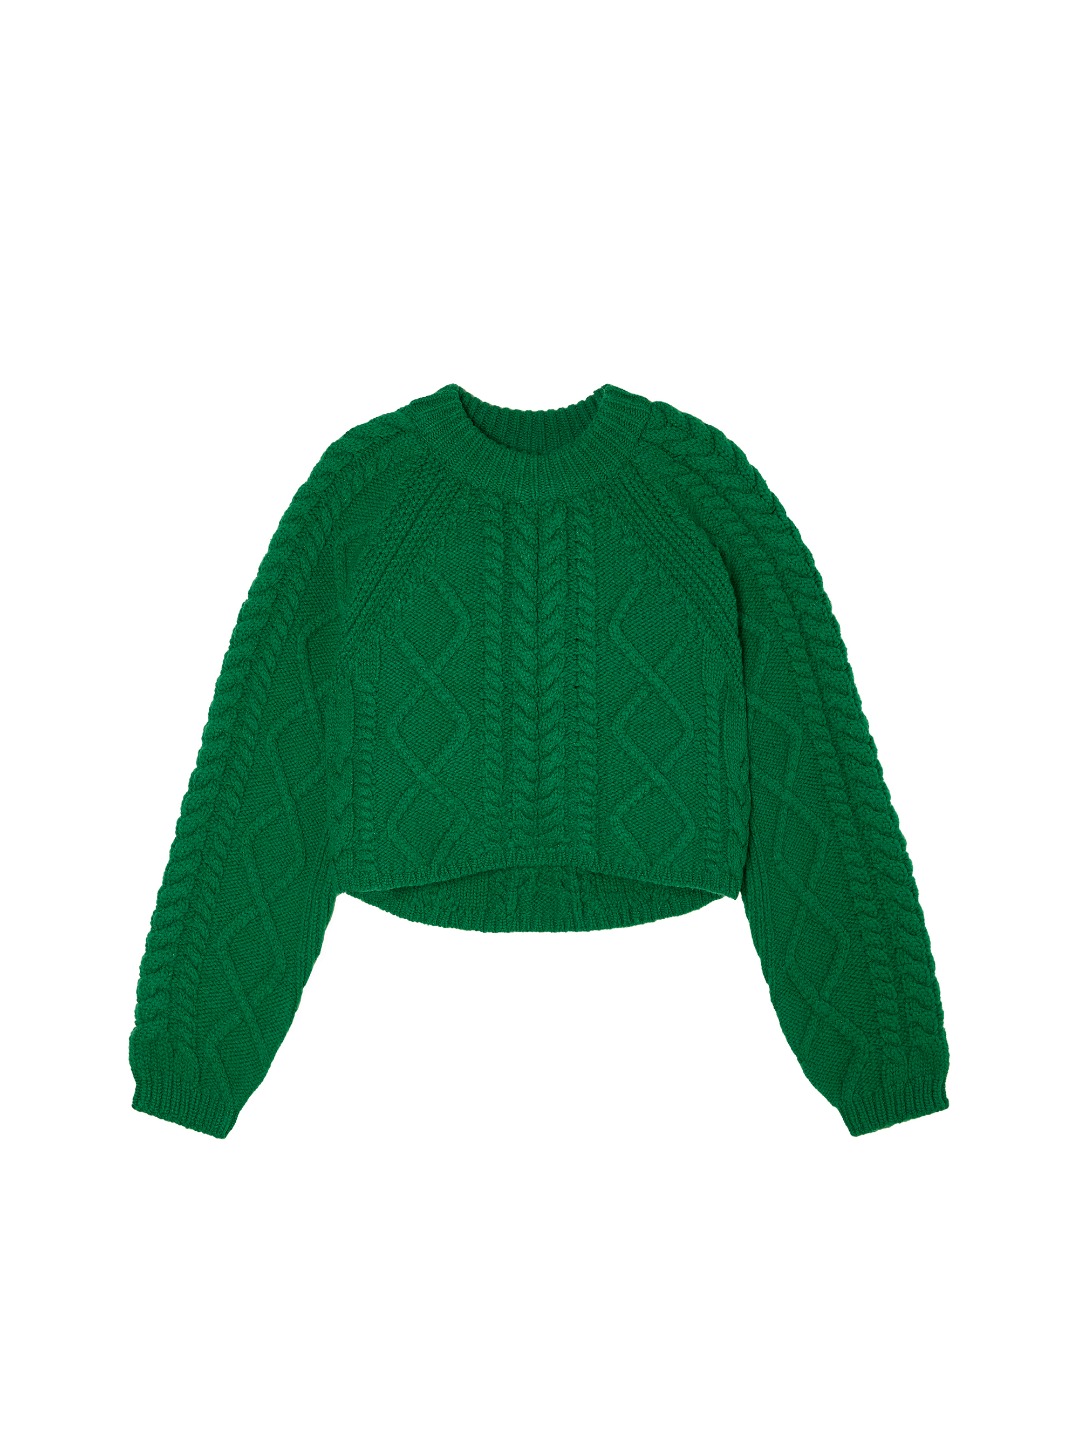 271. Cable Knitted Cropped Sweater / 케이블 니트 크롭 스웨터